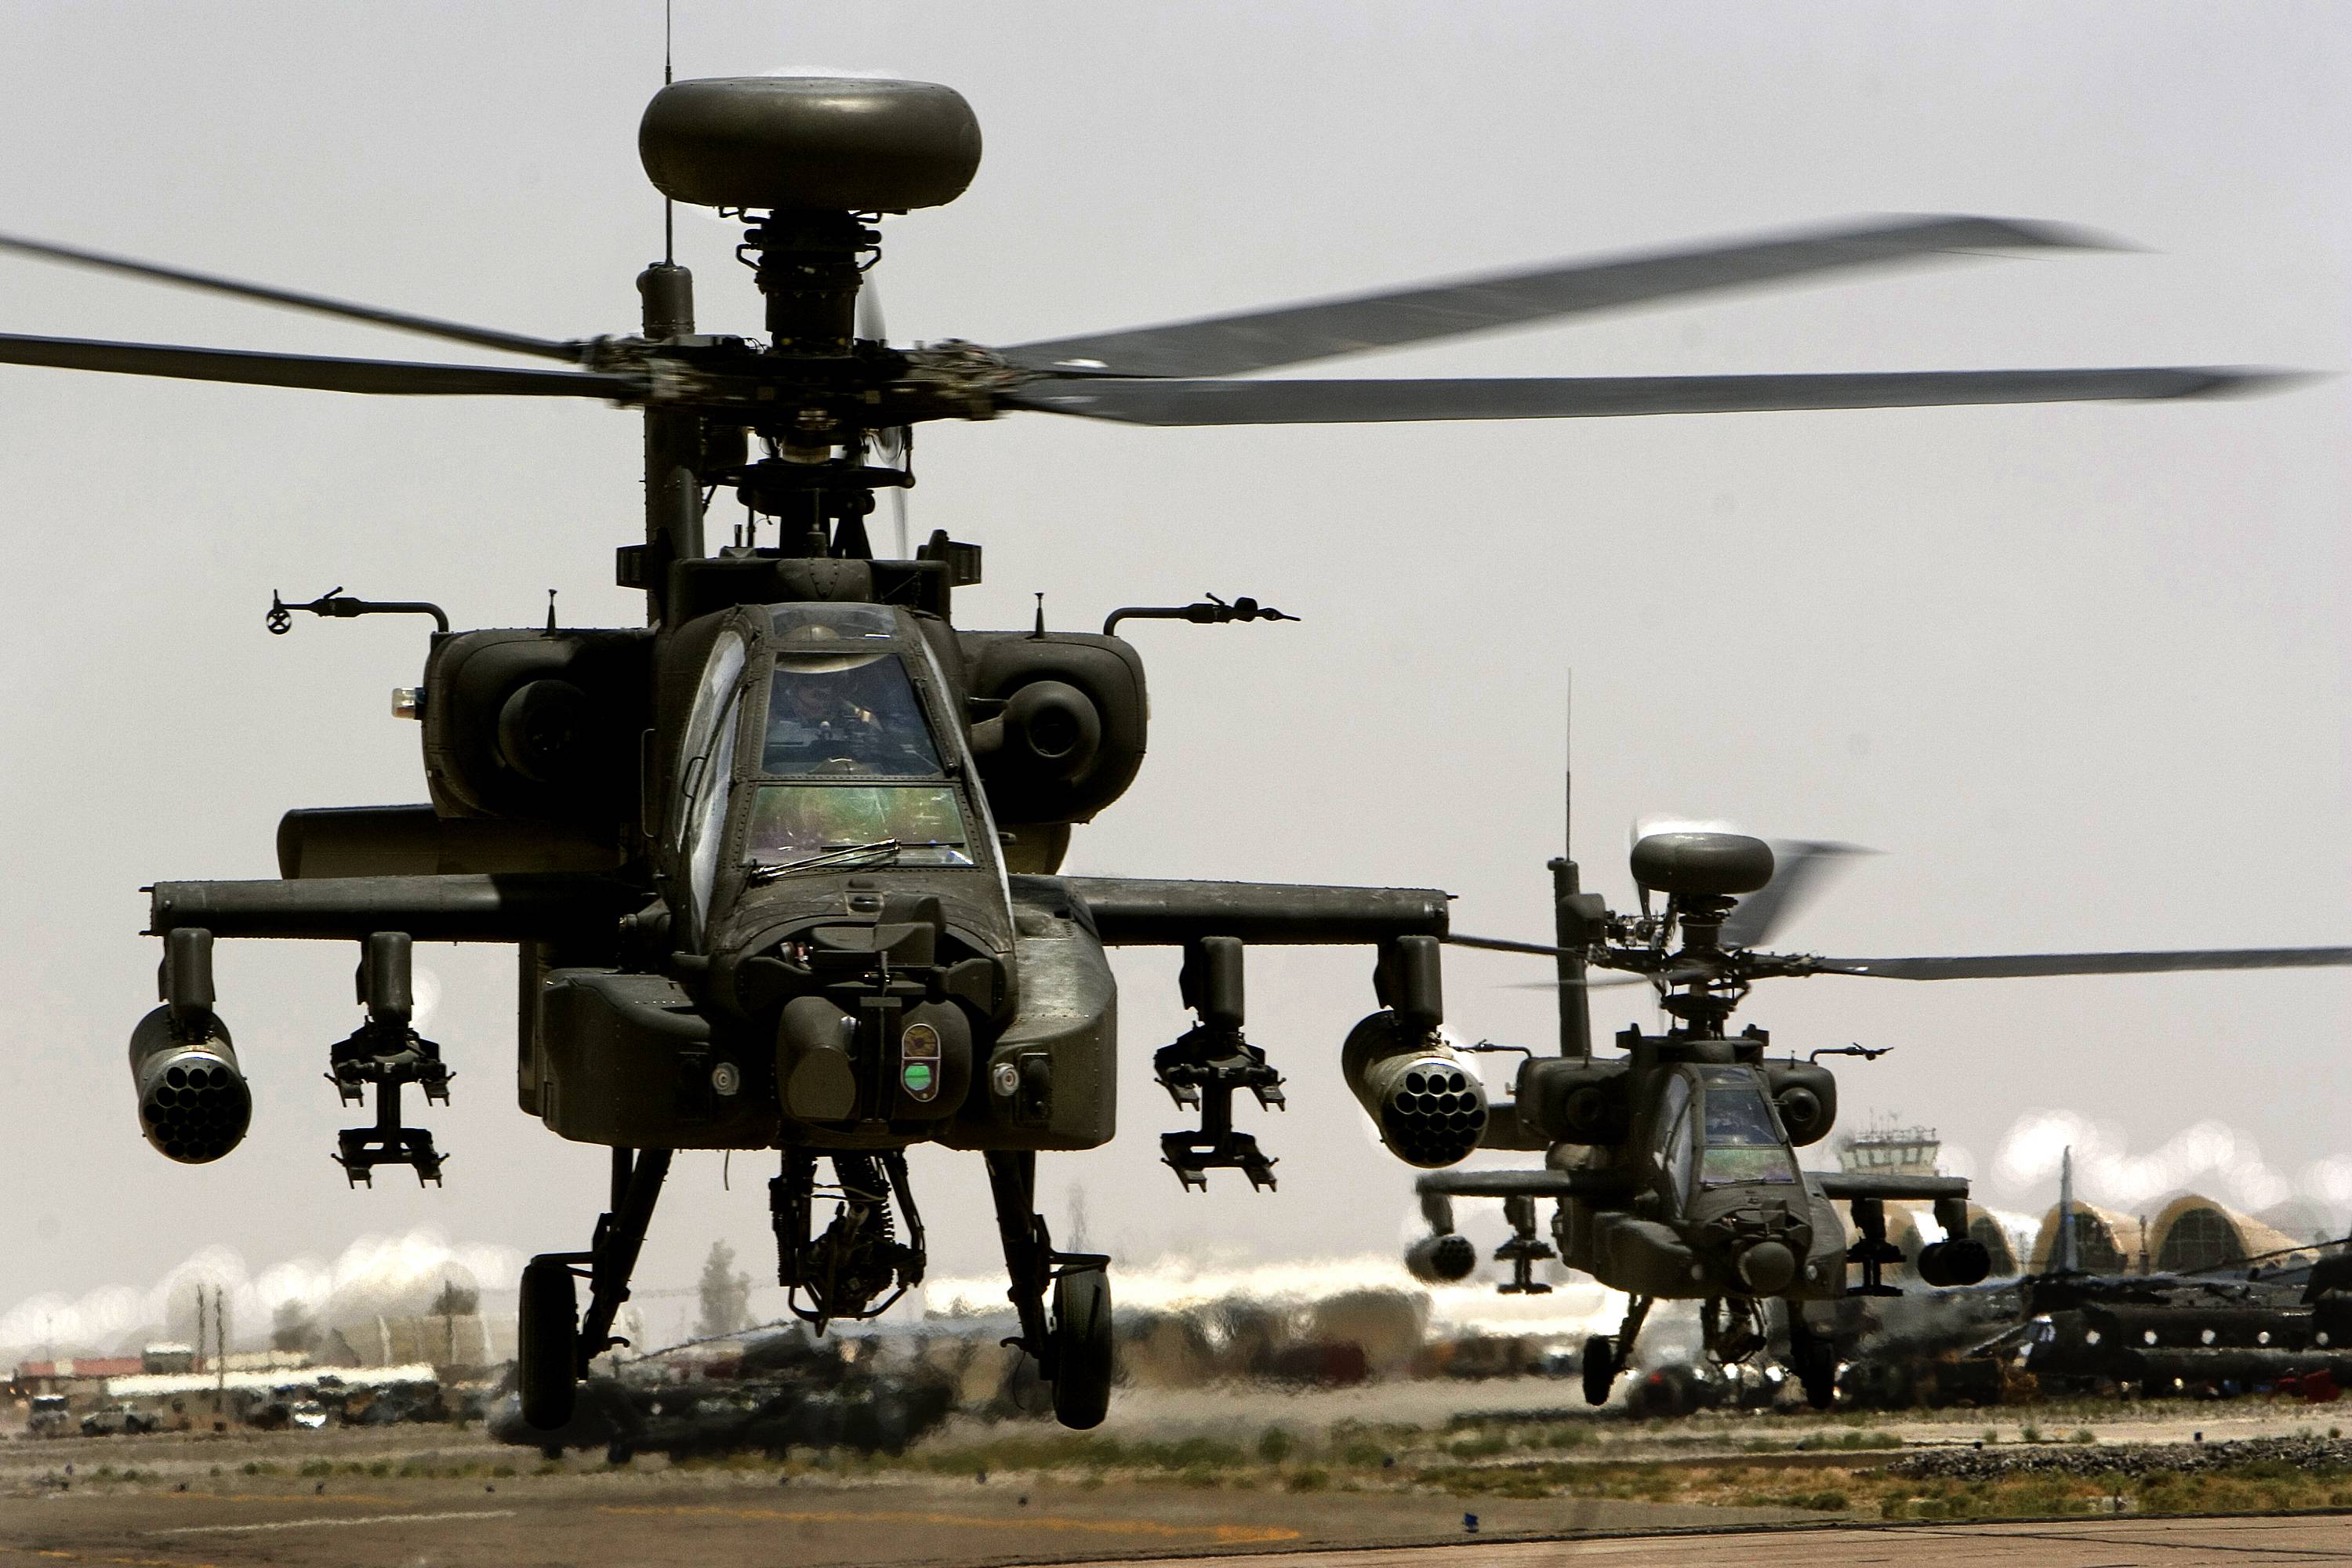 AH 64 Apache Helicopter Wallpaper